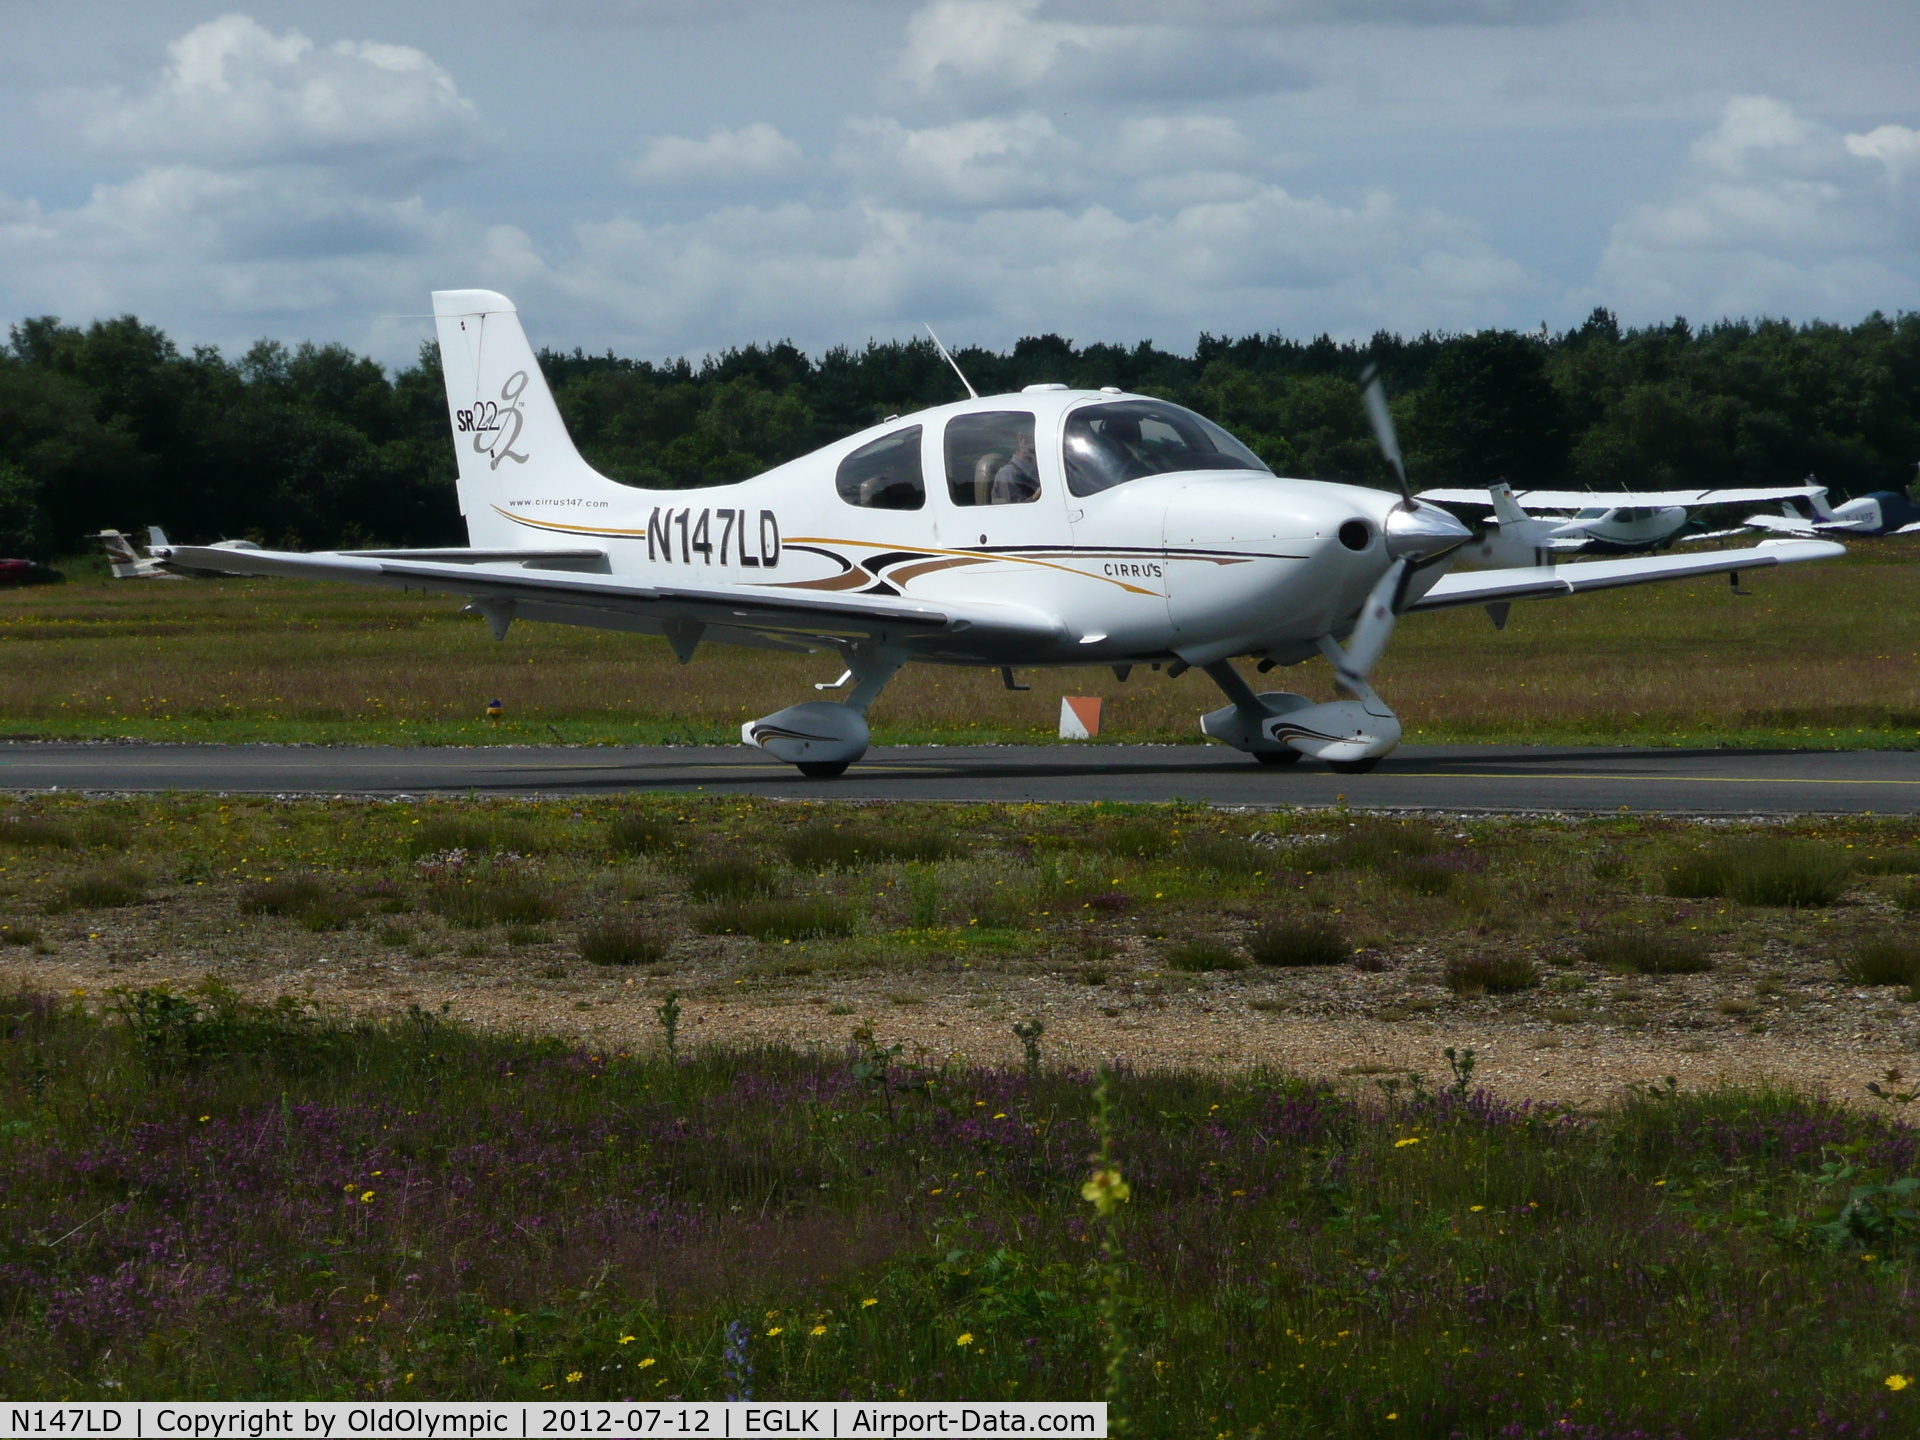 N147LD, 2004 Cirrus SR22 G2 C/N 0937, Holding for departure RW25